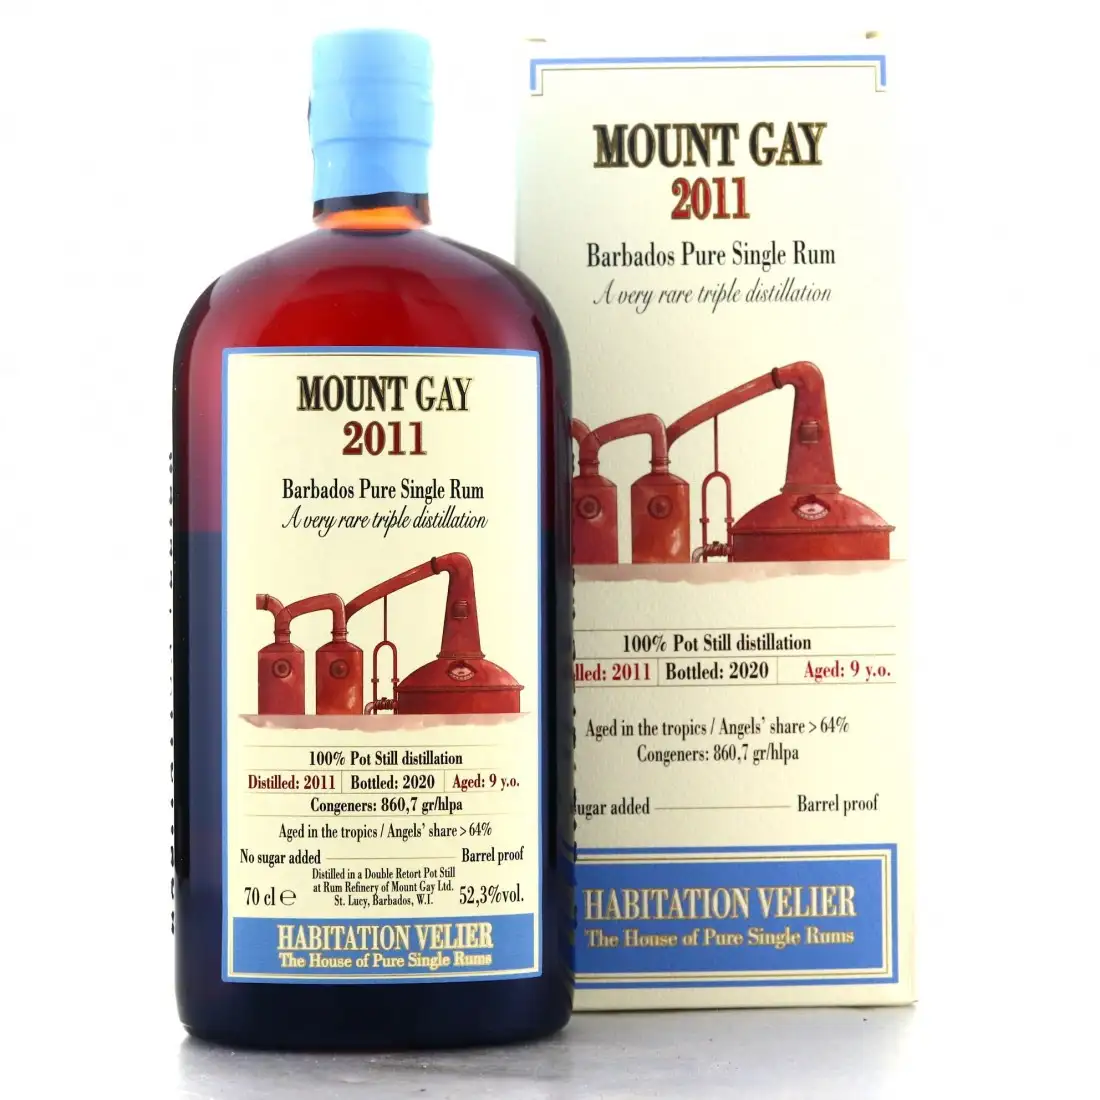 Image of the front of the bottle of the rum Last Ward